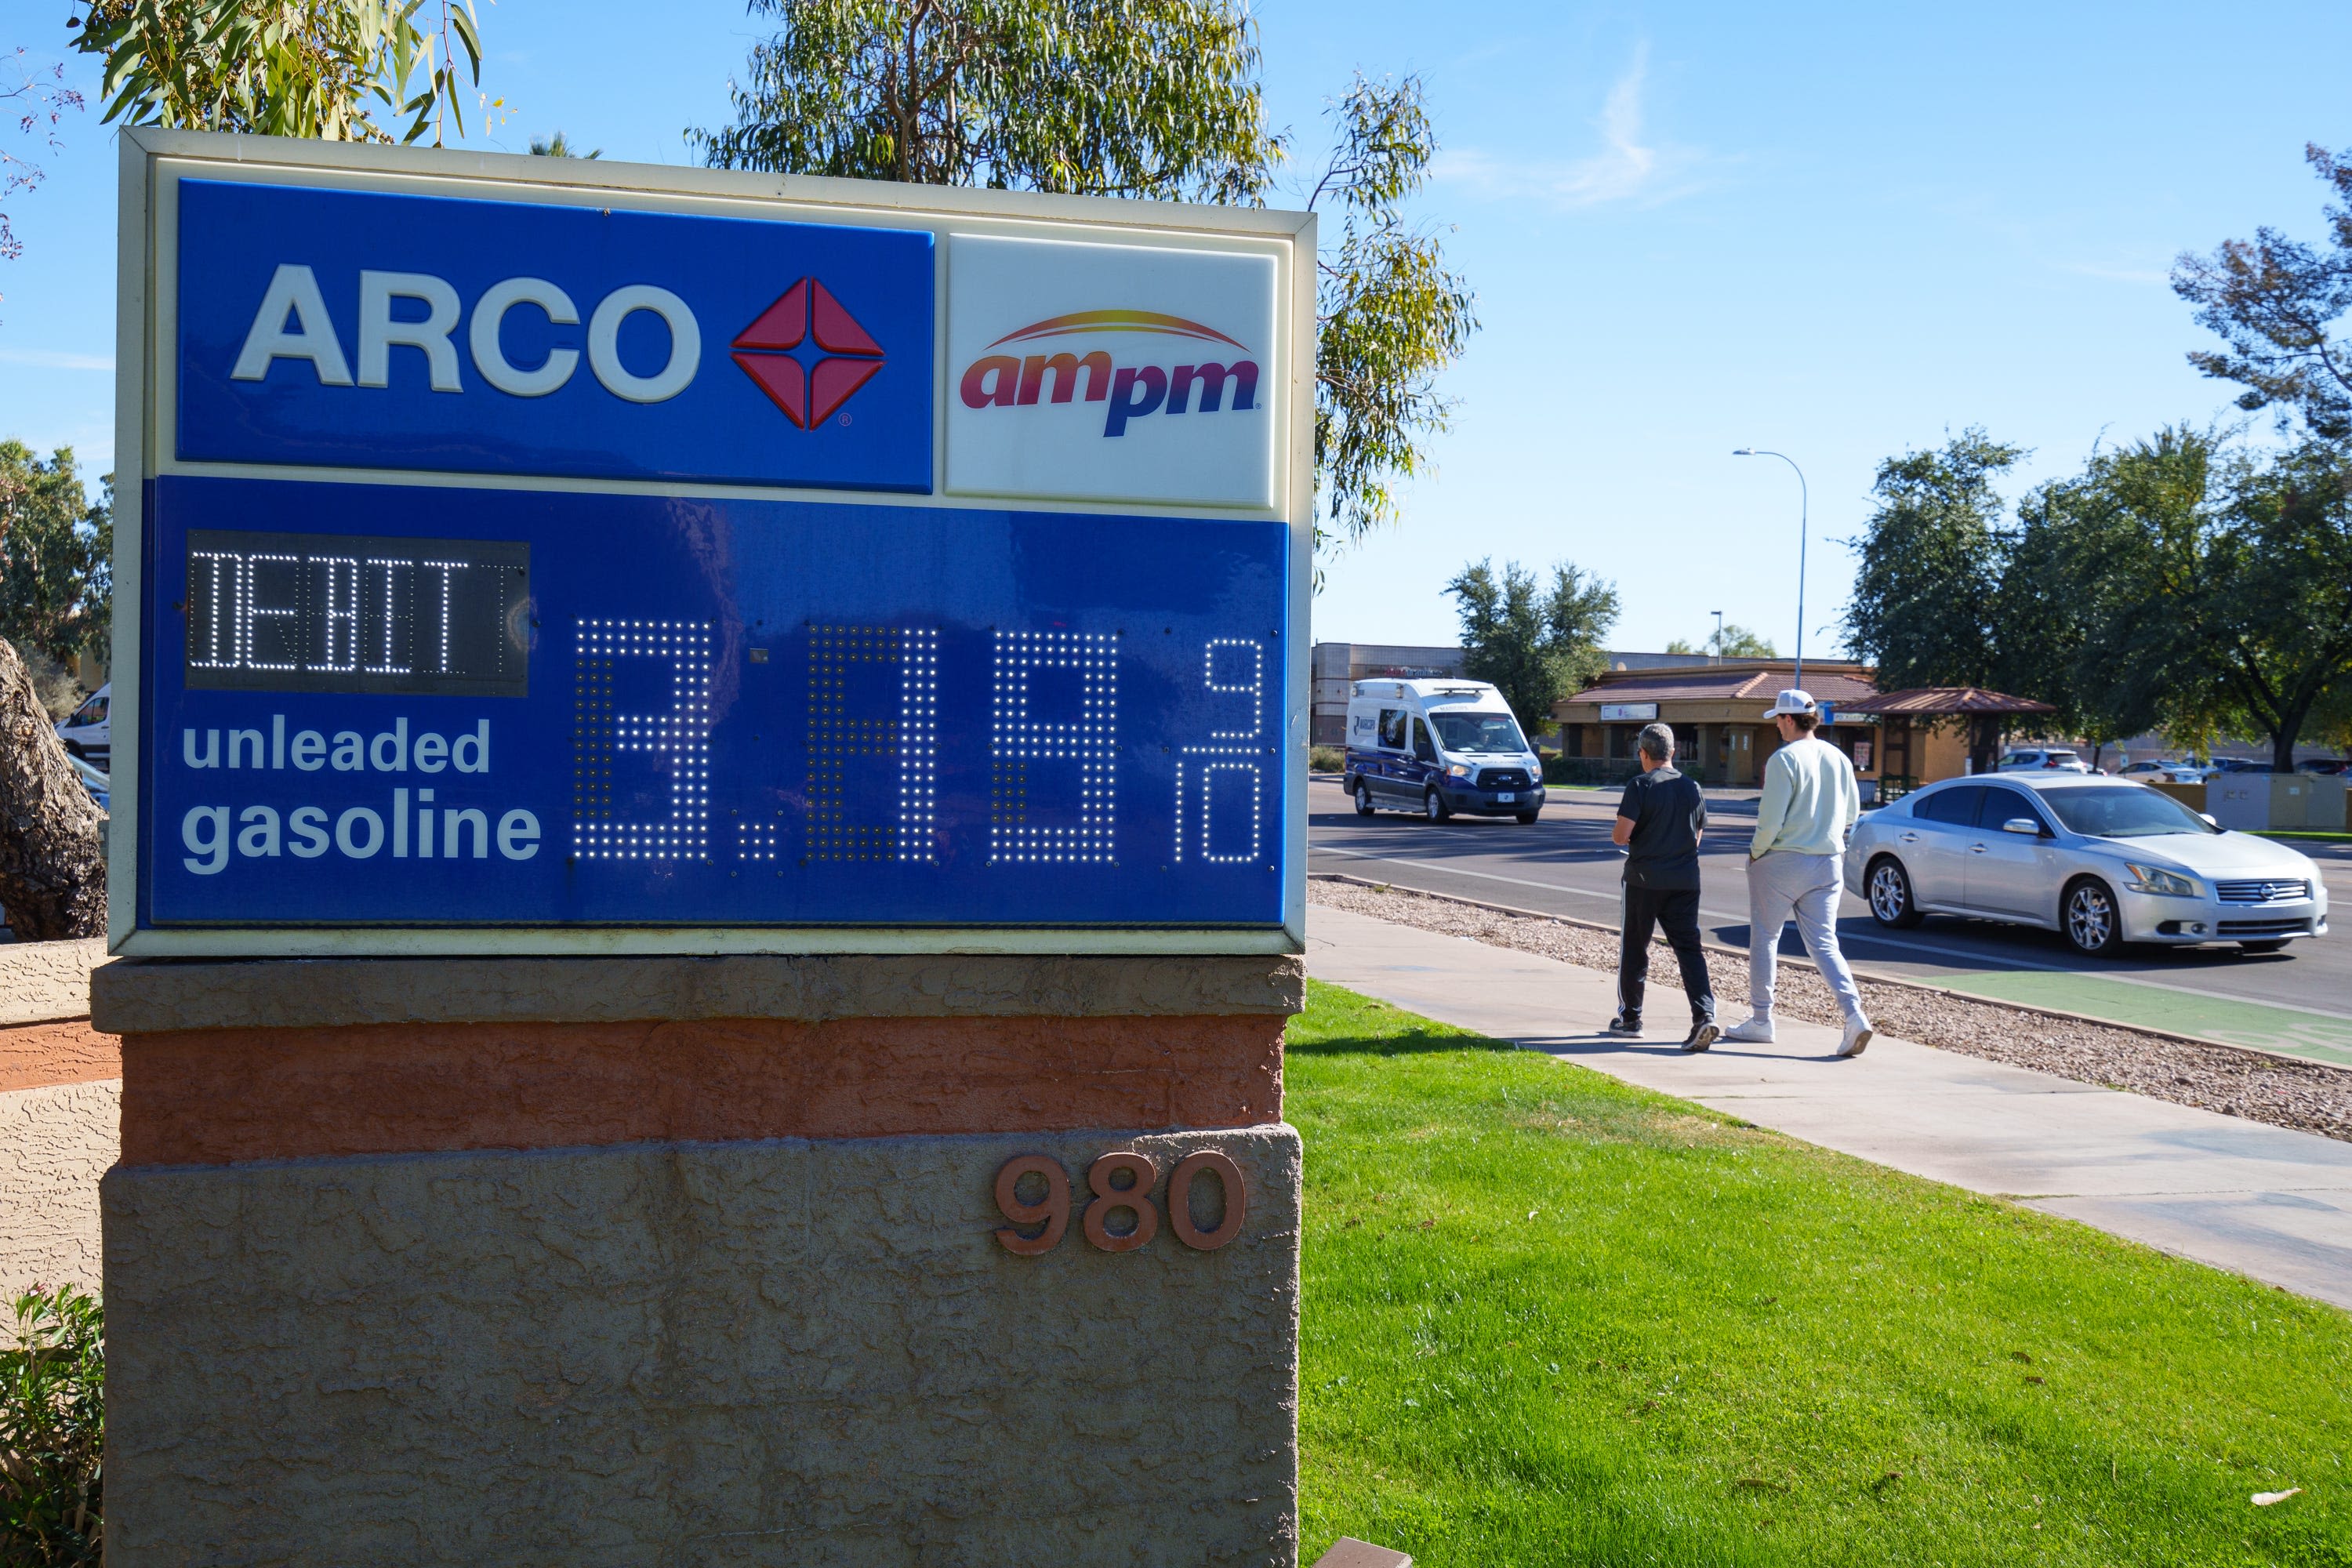 Here's how much gas is in Arizona and where to find a deal